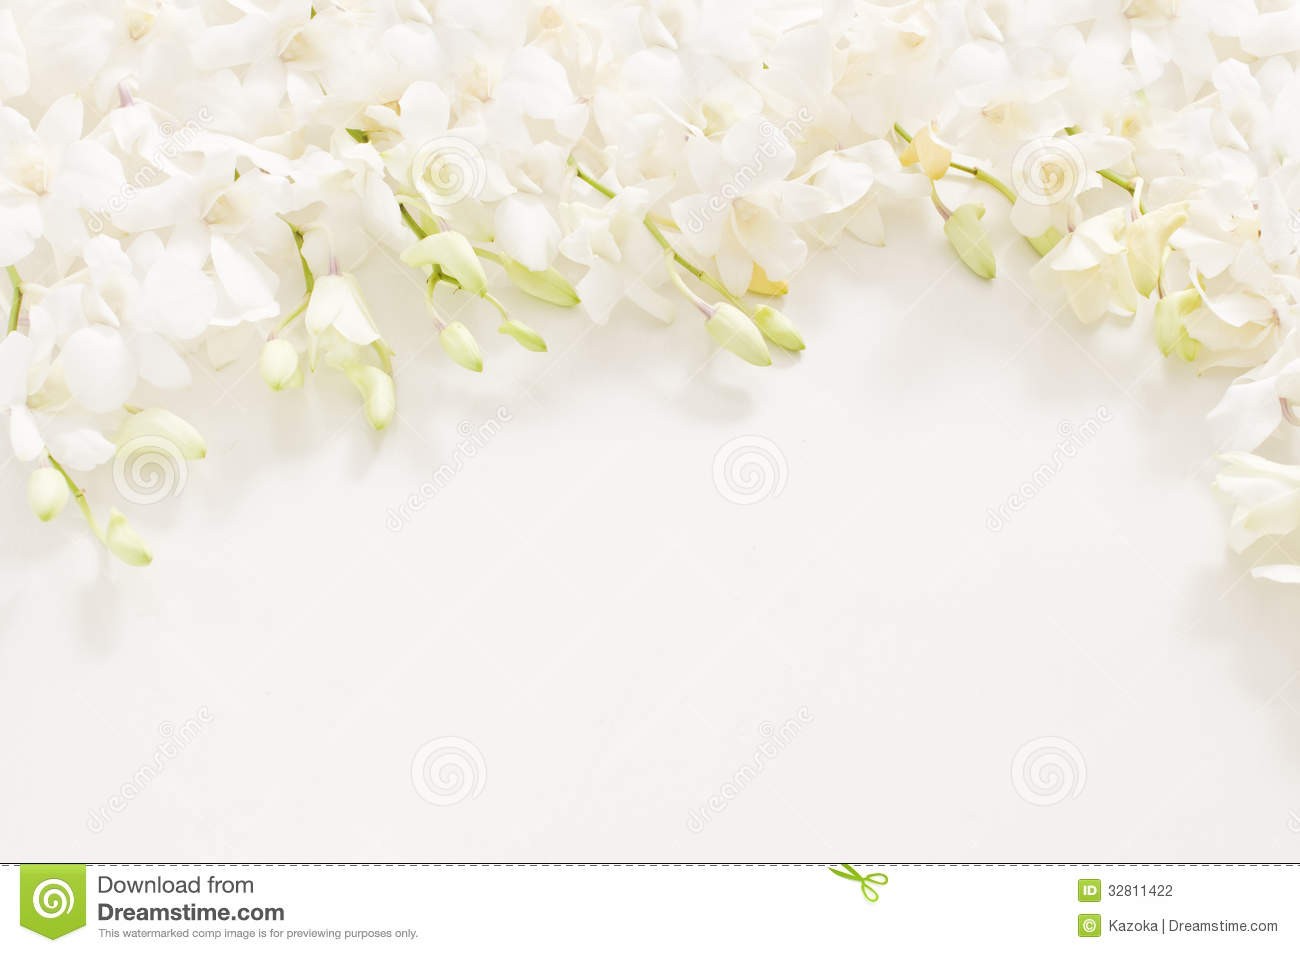 Image Of Funeral Stock Photo Rosary Japanese 32811422 Background Pictures For Programs